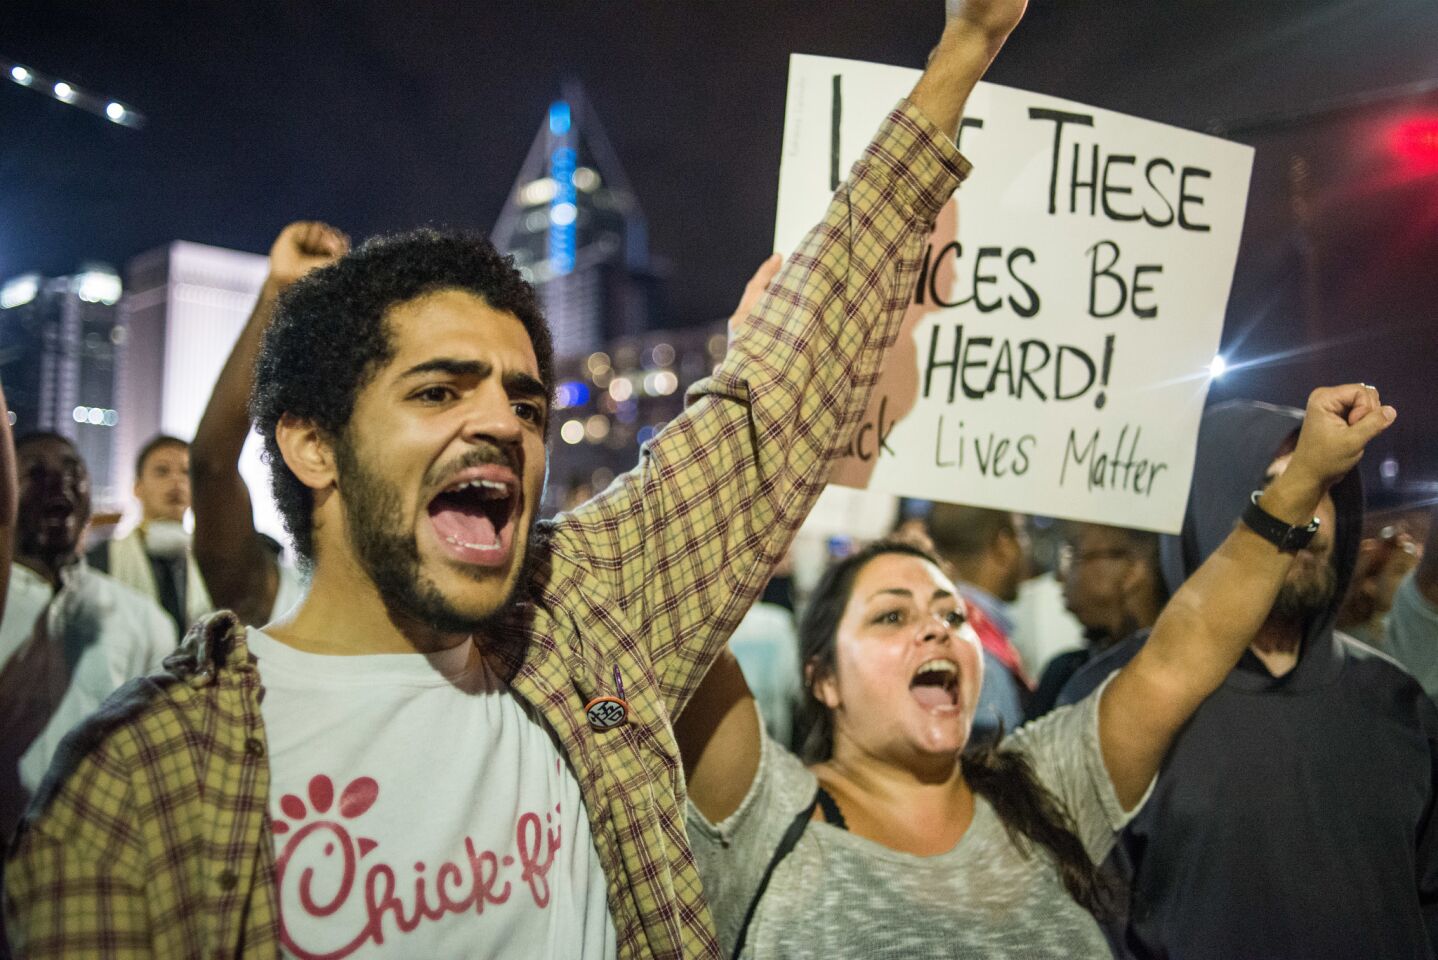 As curfew in Charlotte approached Thursday night, demonstrators voiced their views loudly.